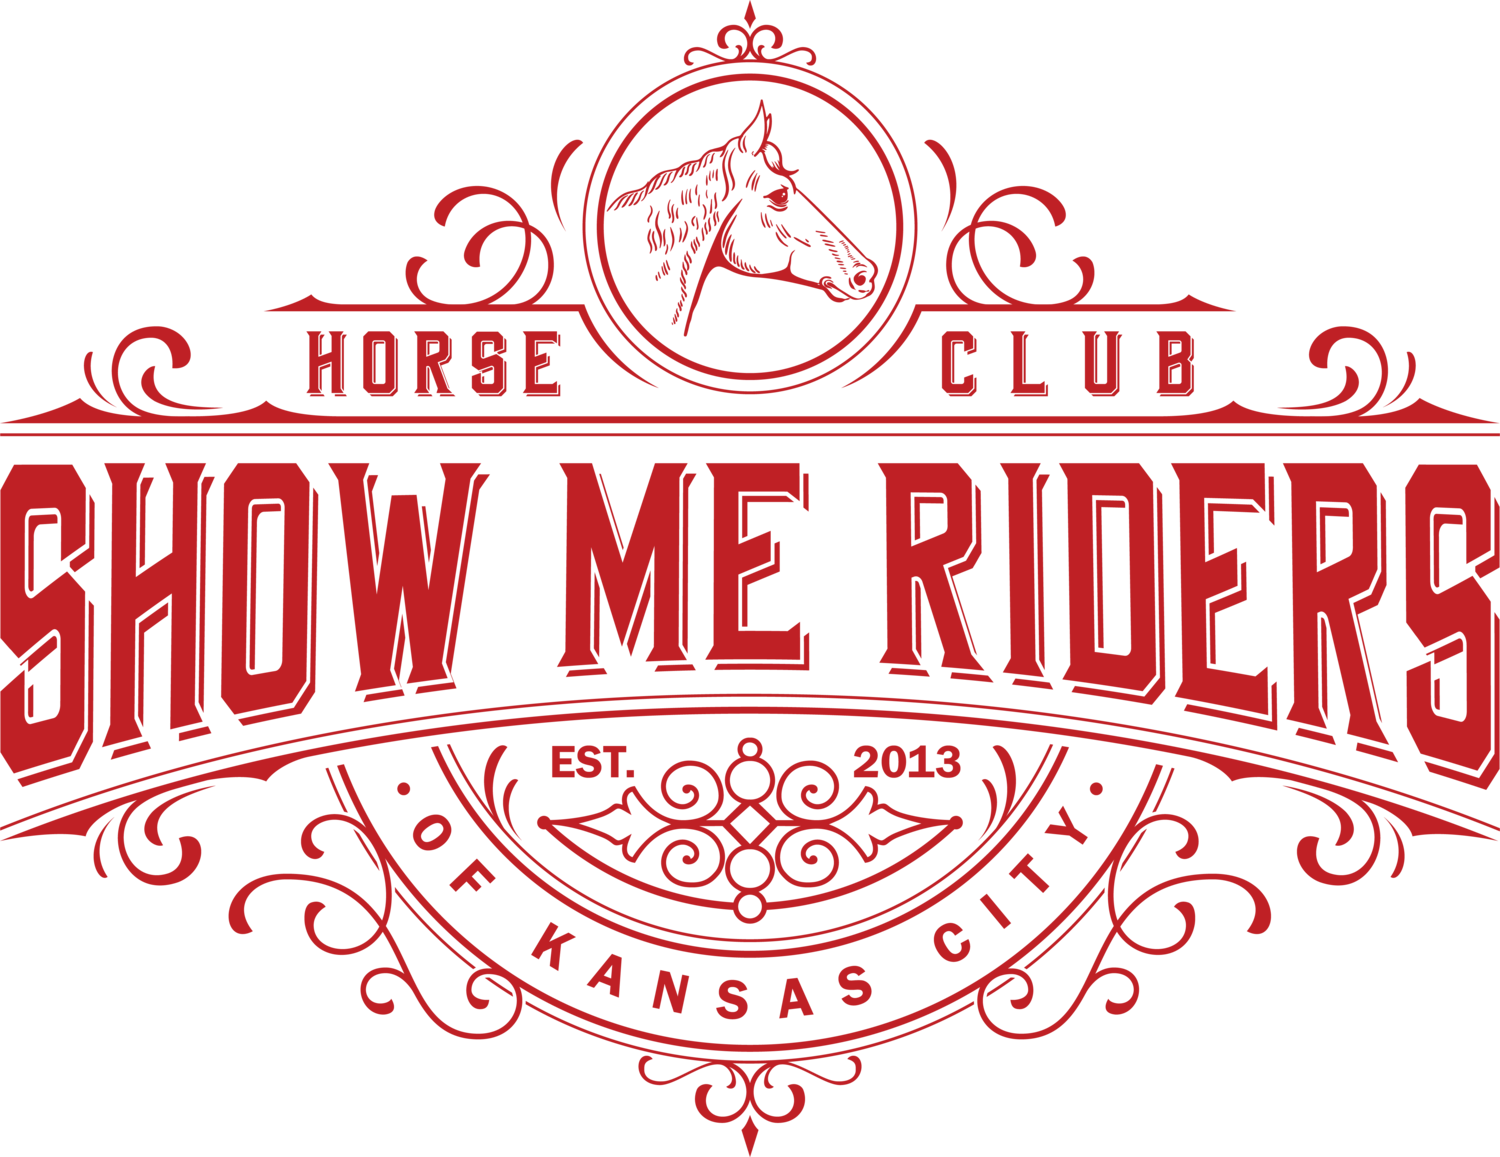 Show Me Riders